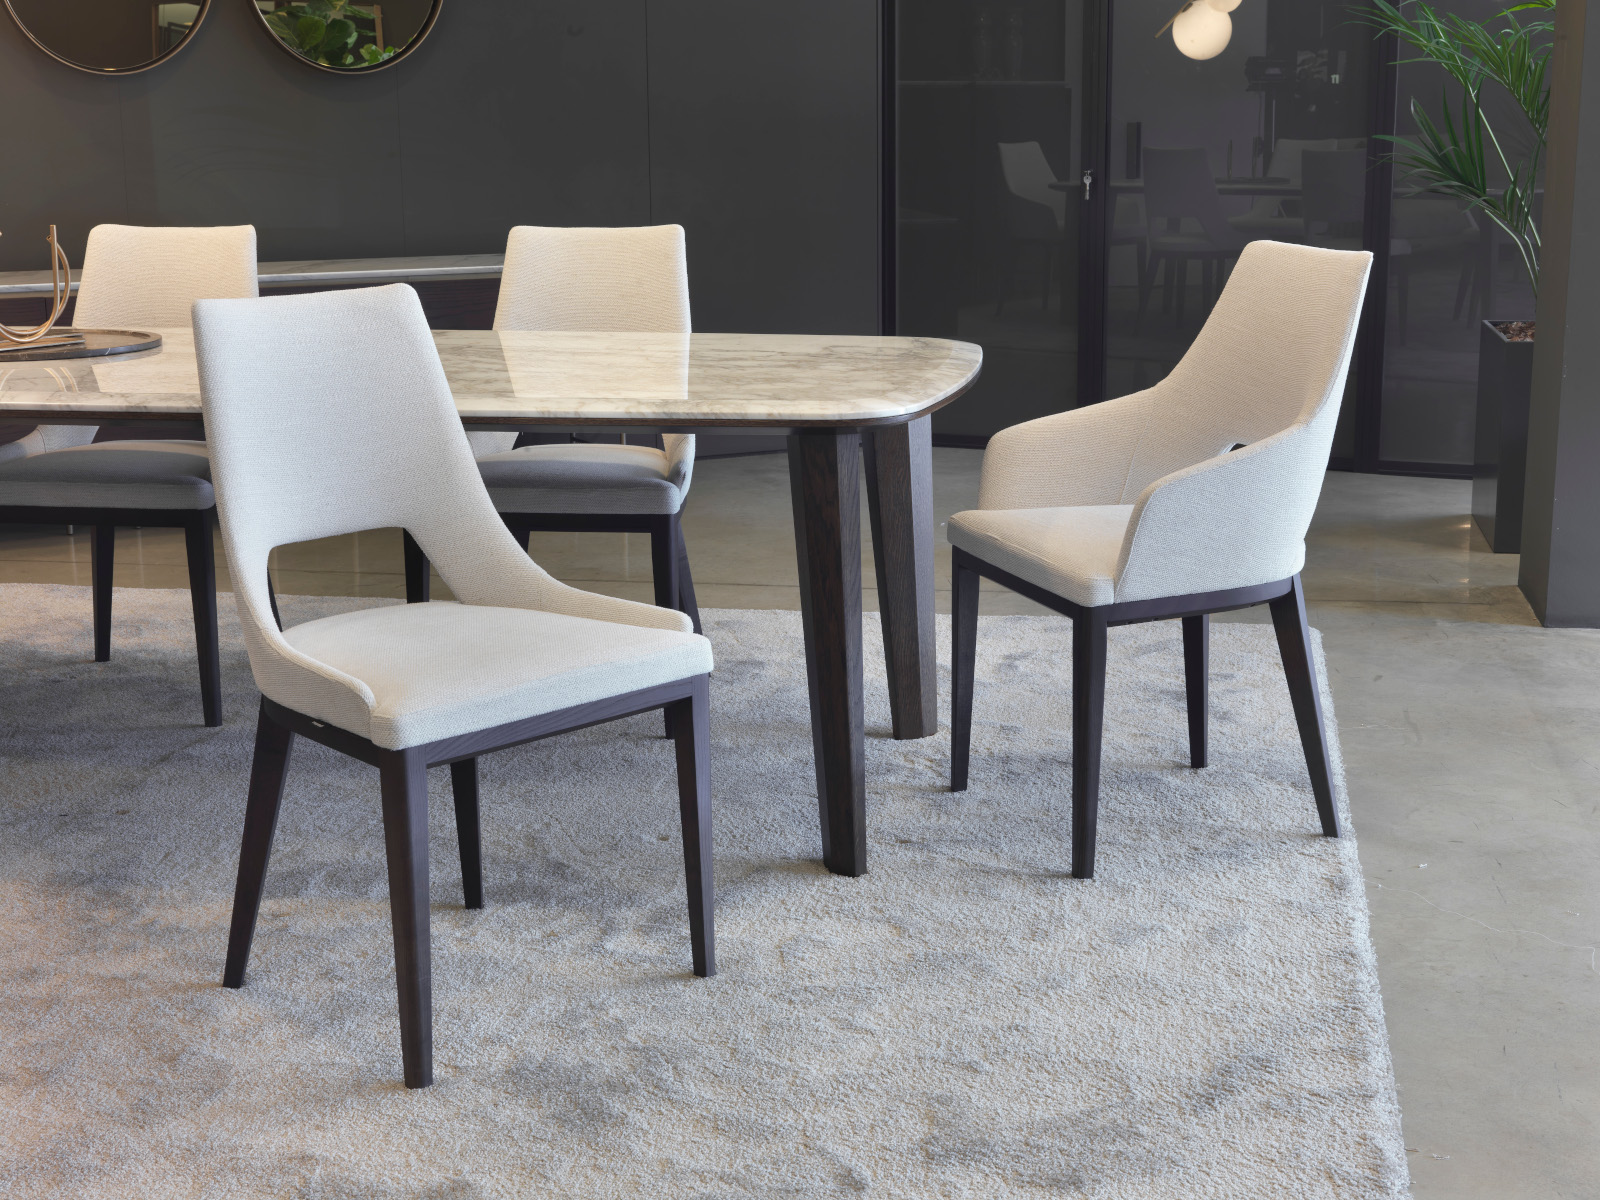 Dining chairs rubelli wooden base Grace